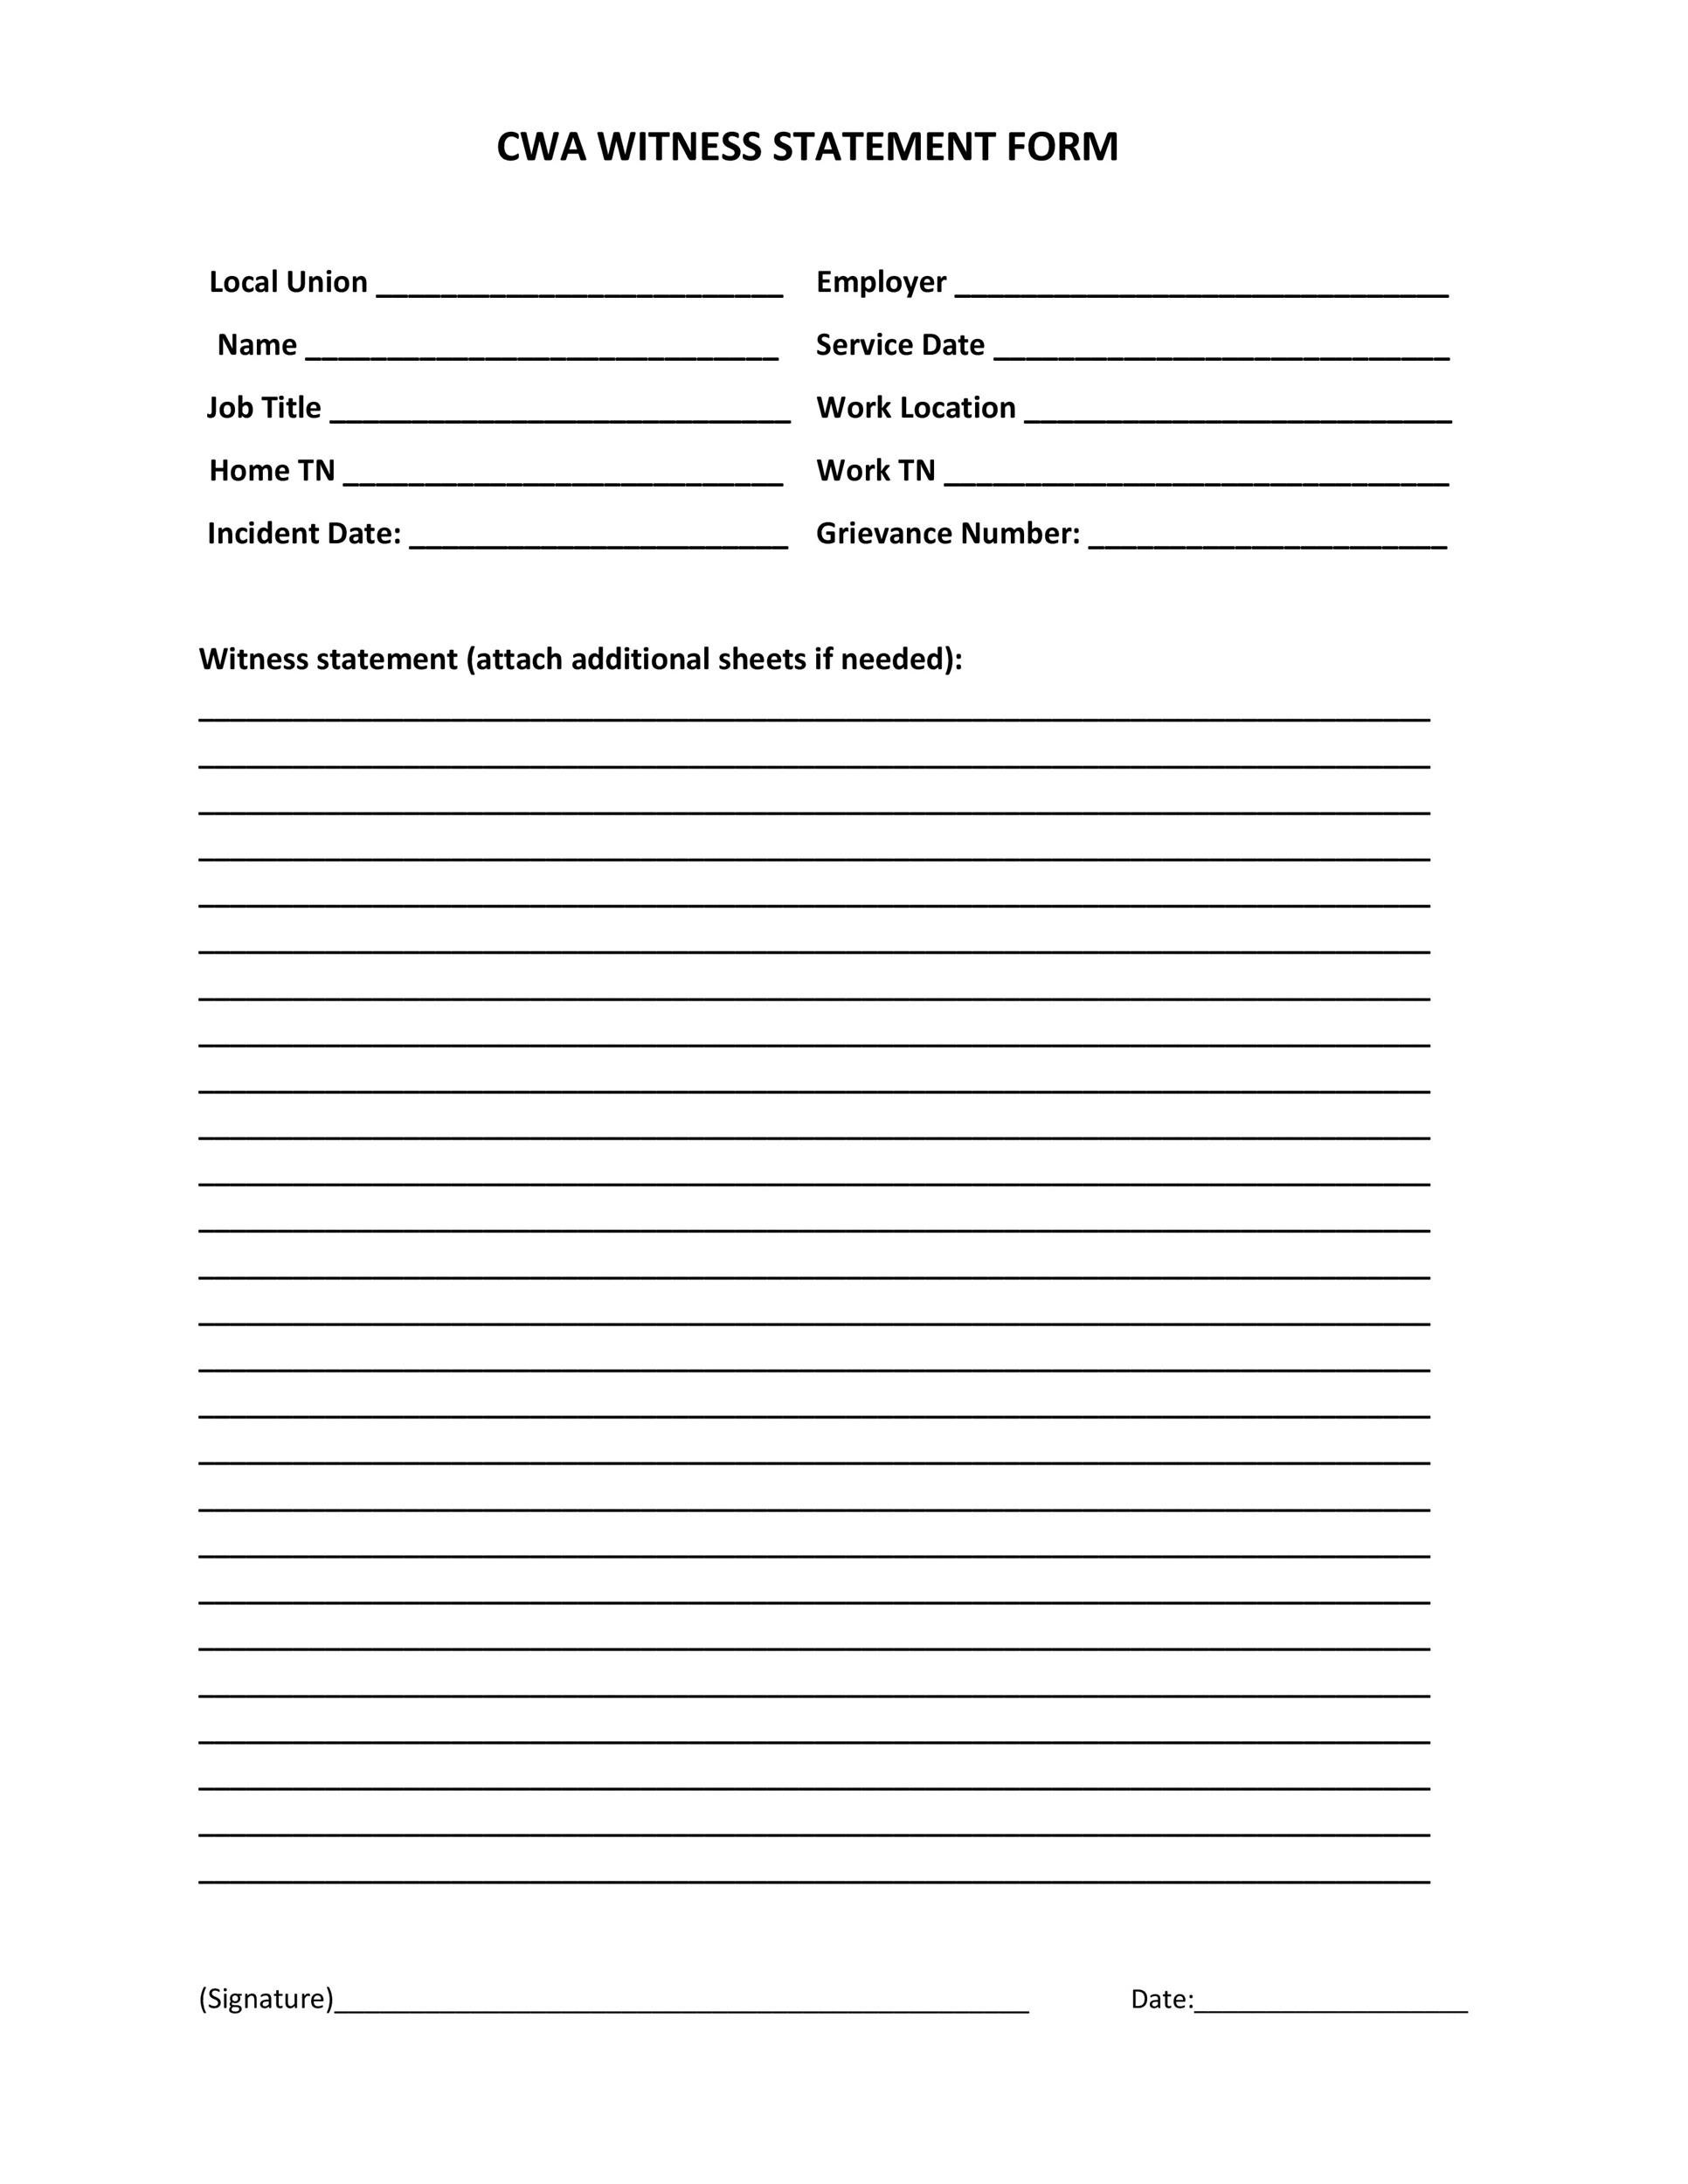 50 Professional Witness Statement Forms Templates ᐅ Templatelab